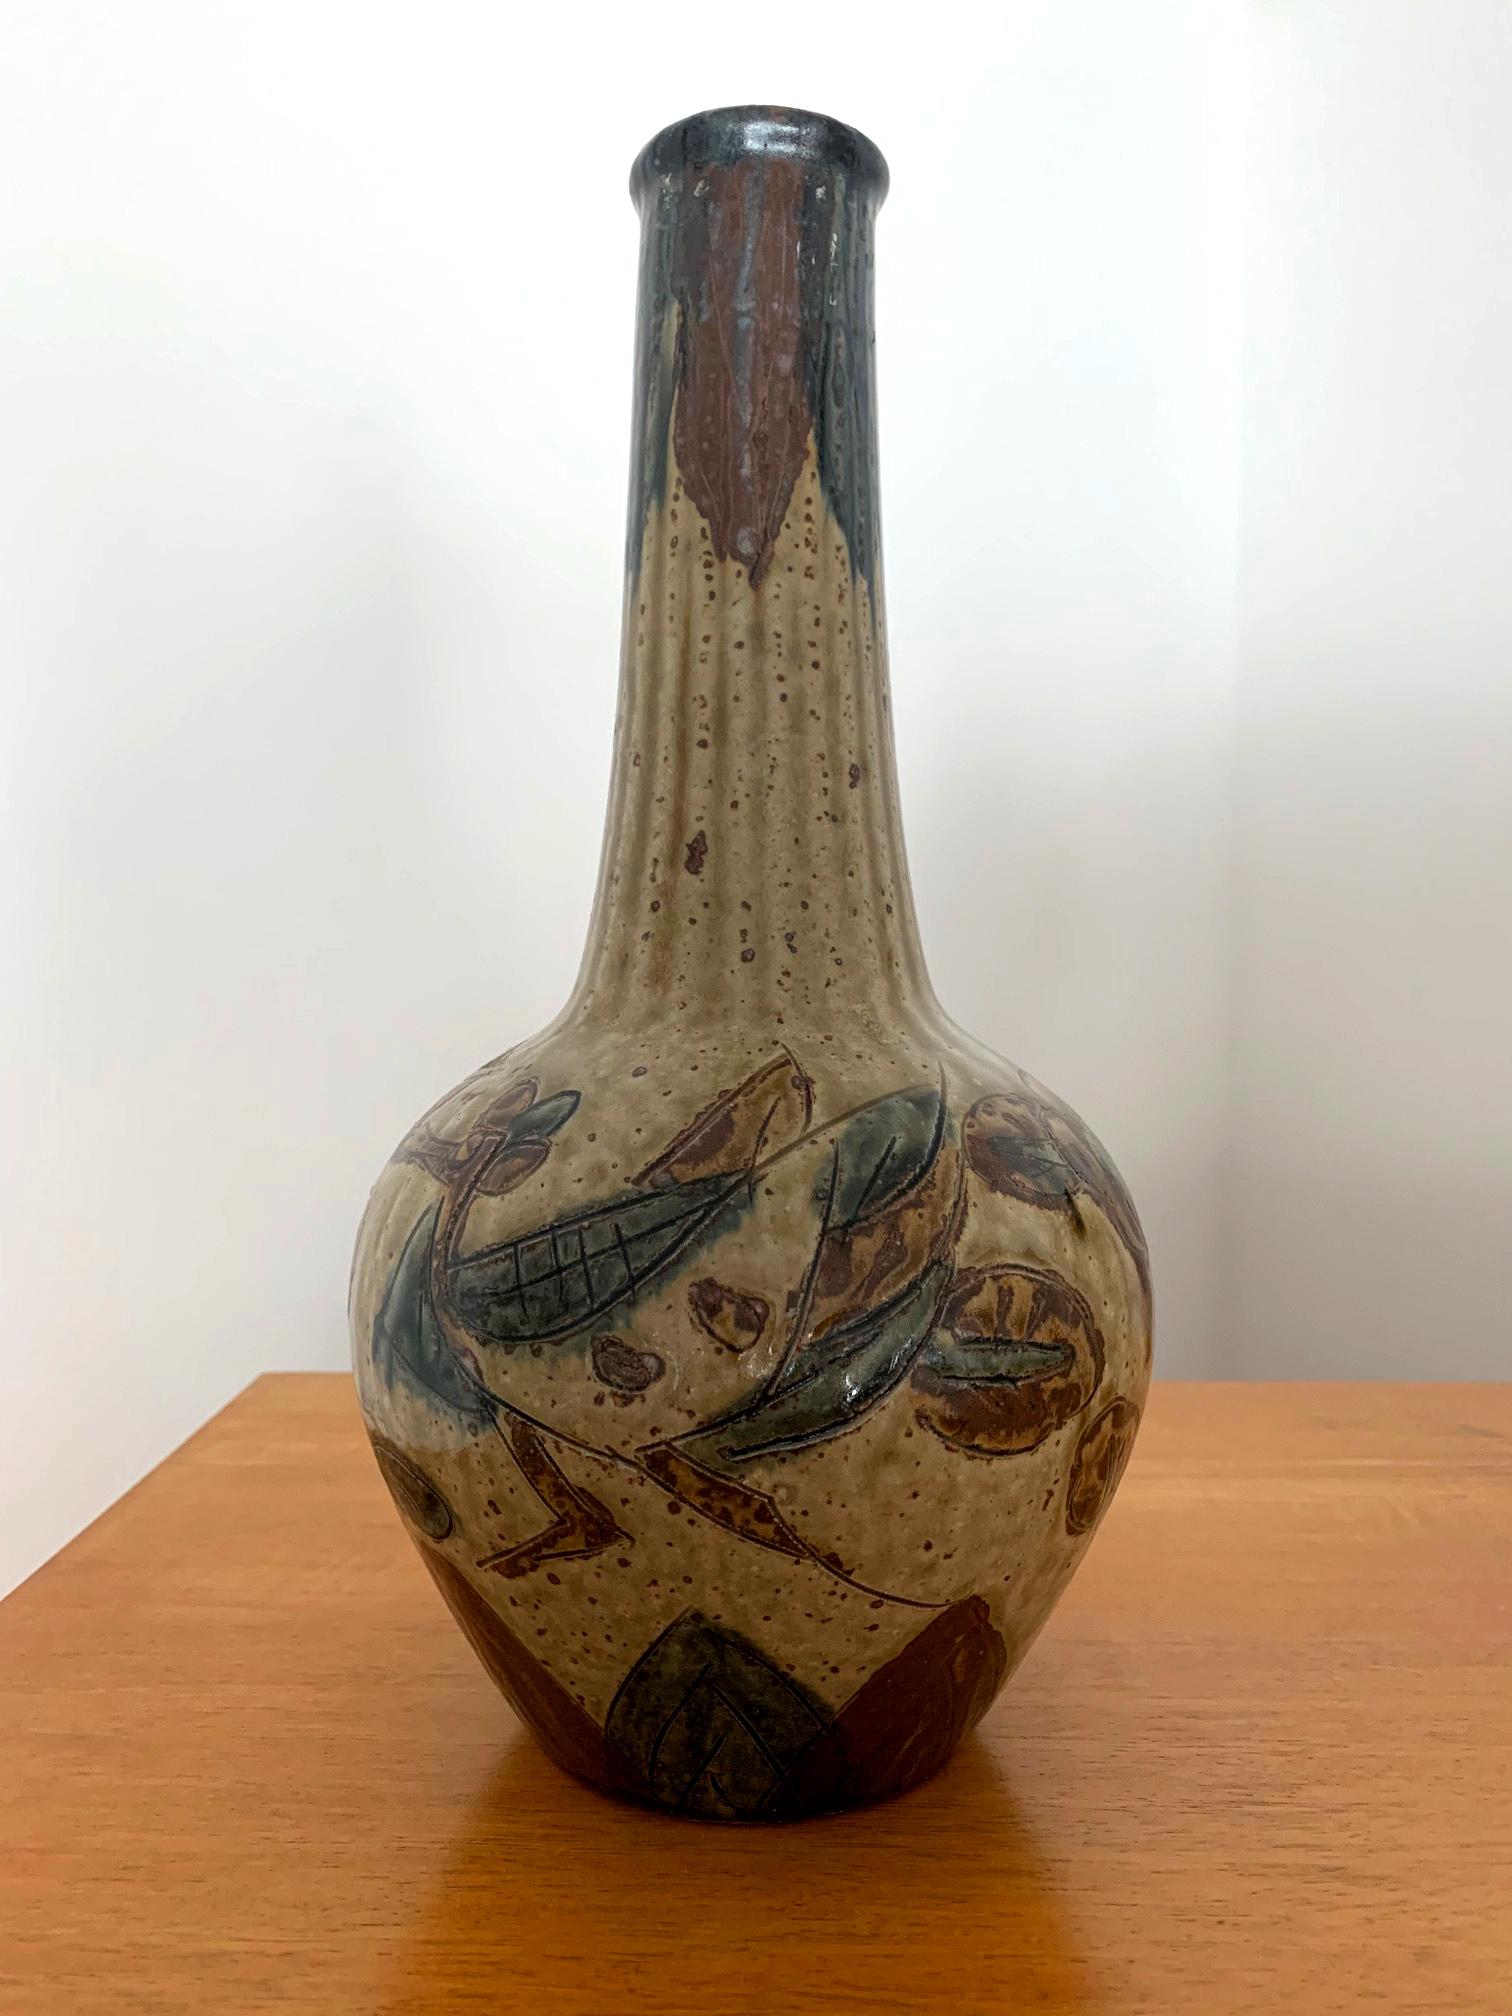 A charming Japanese stoneware vase with carved and over glaze dark green and aubergine enamel decoration on a yellow background circa early 20th century possibly made as a sake bottle or vase, the bottle features elongated flute lines along its body